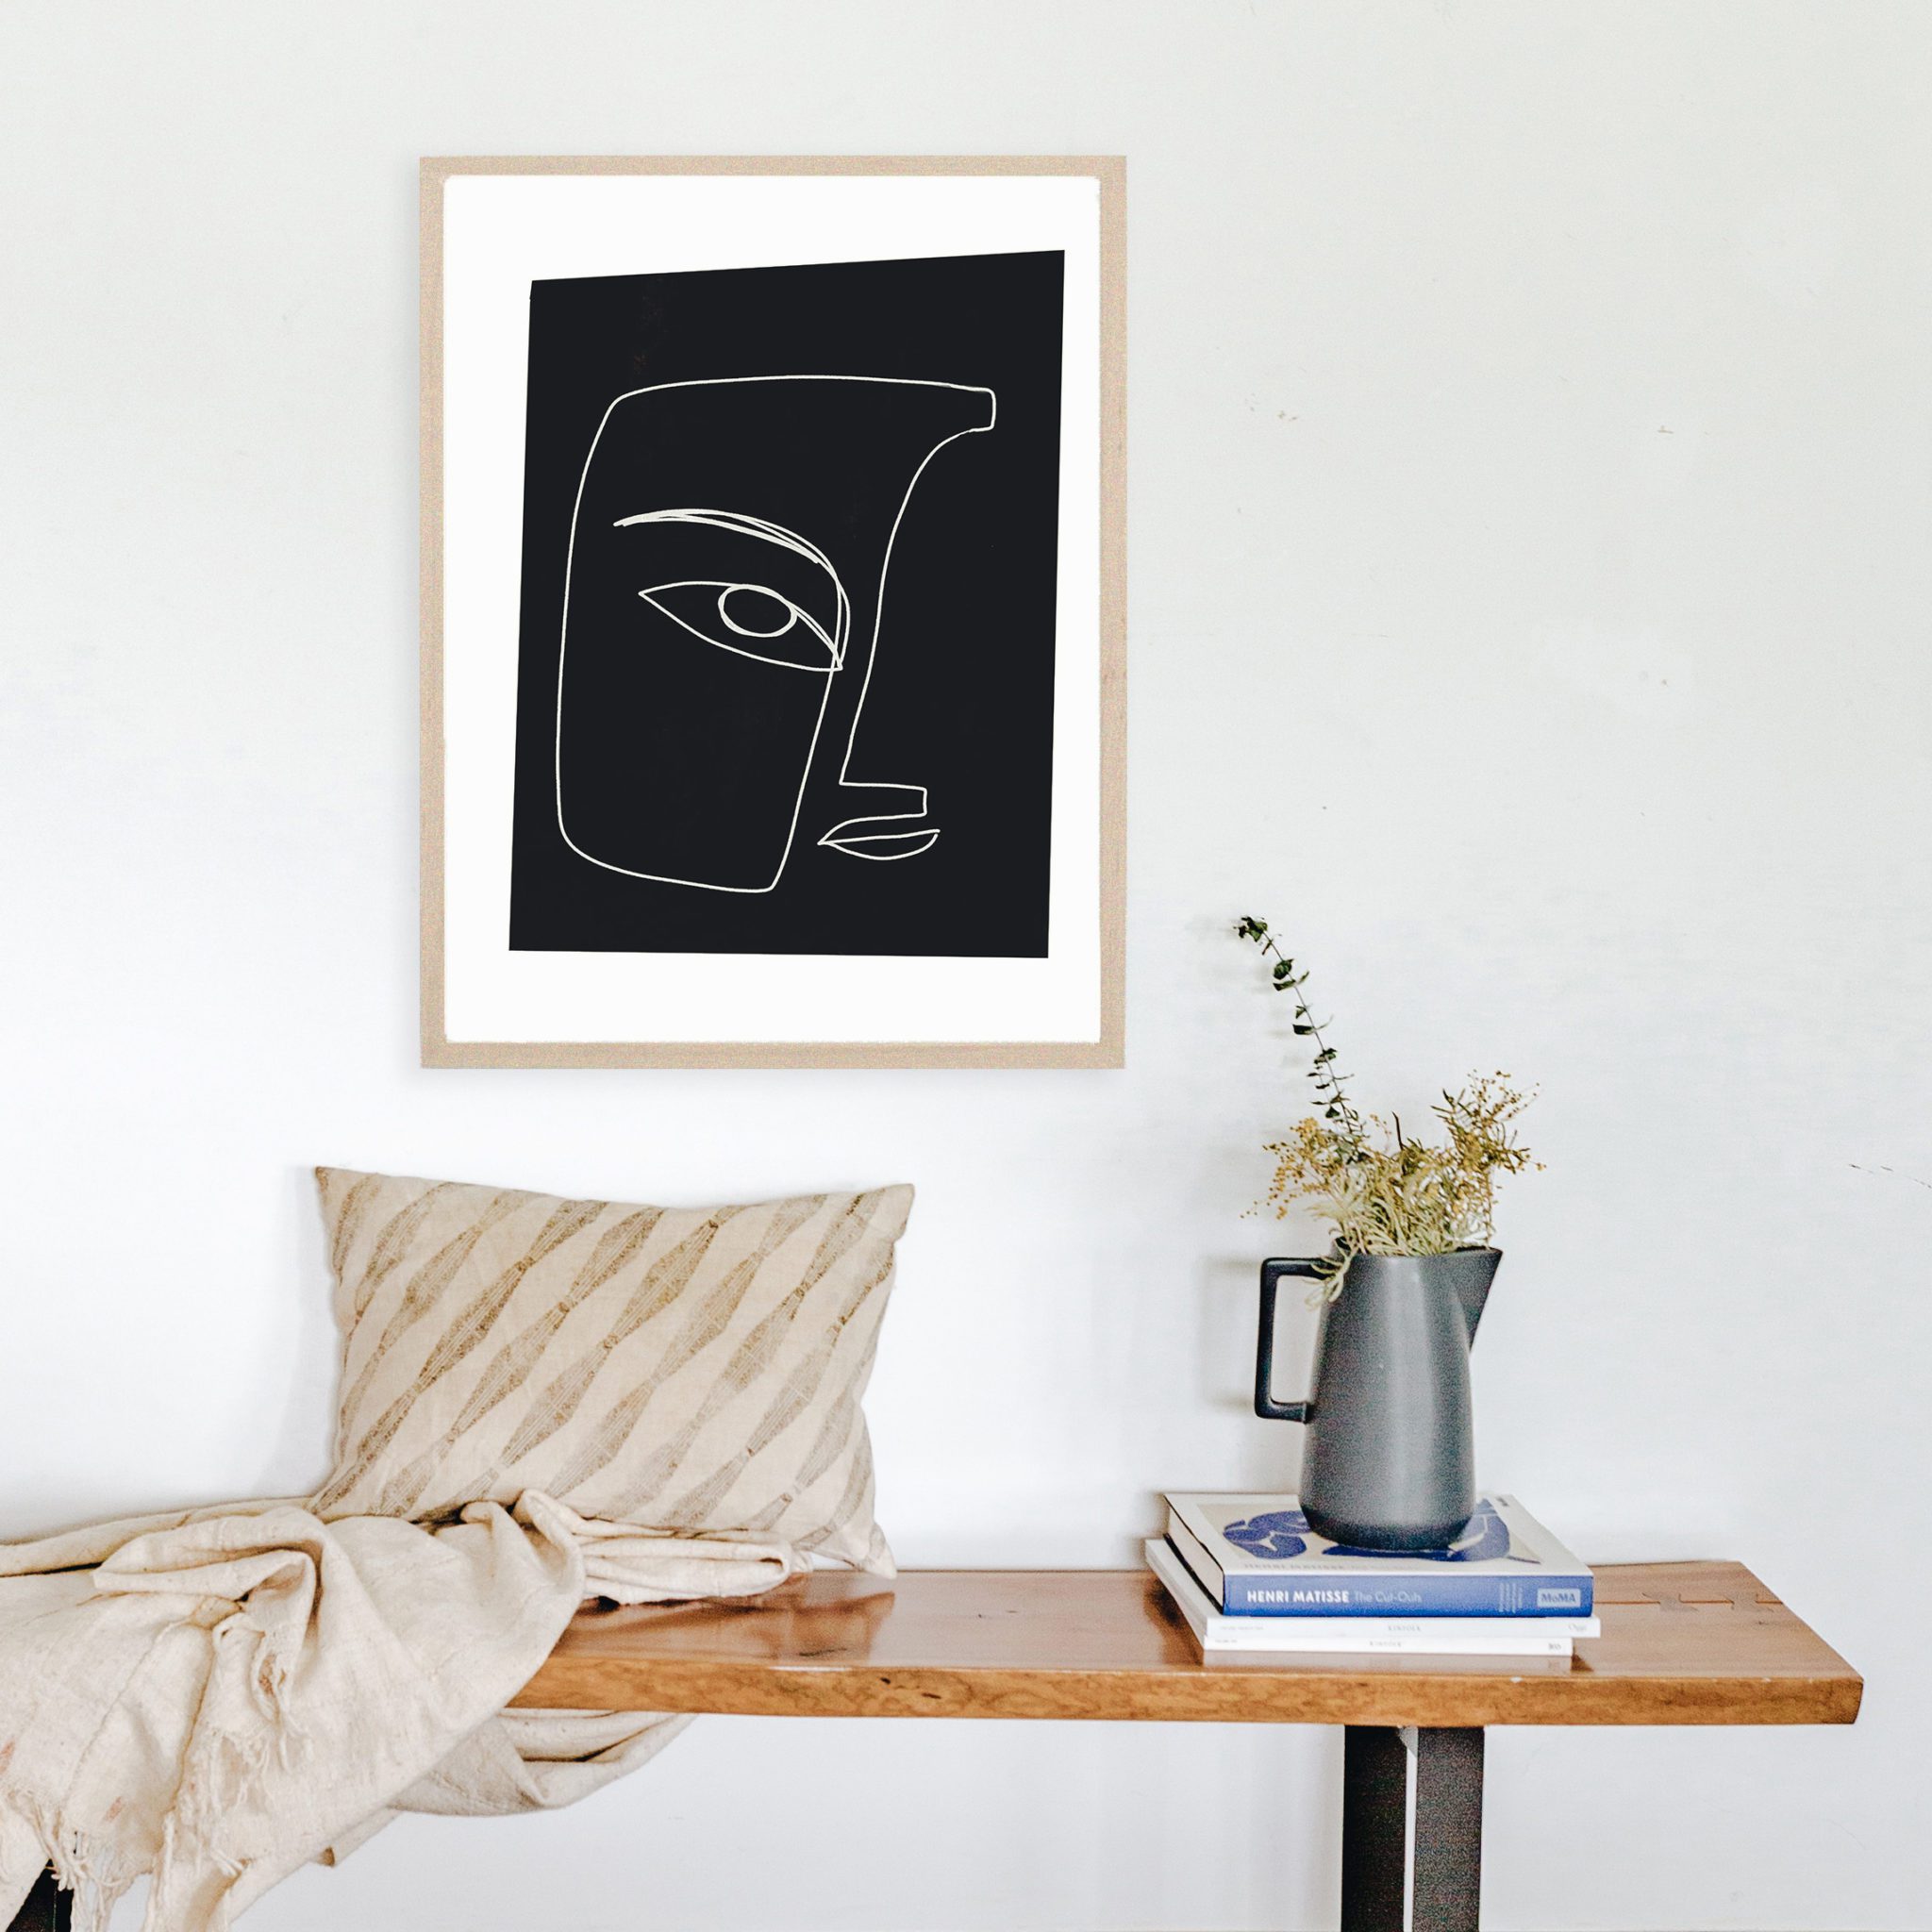 West Elm Local: 6 New Prints for Our Latest Collaboration | Wit ...